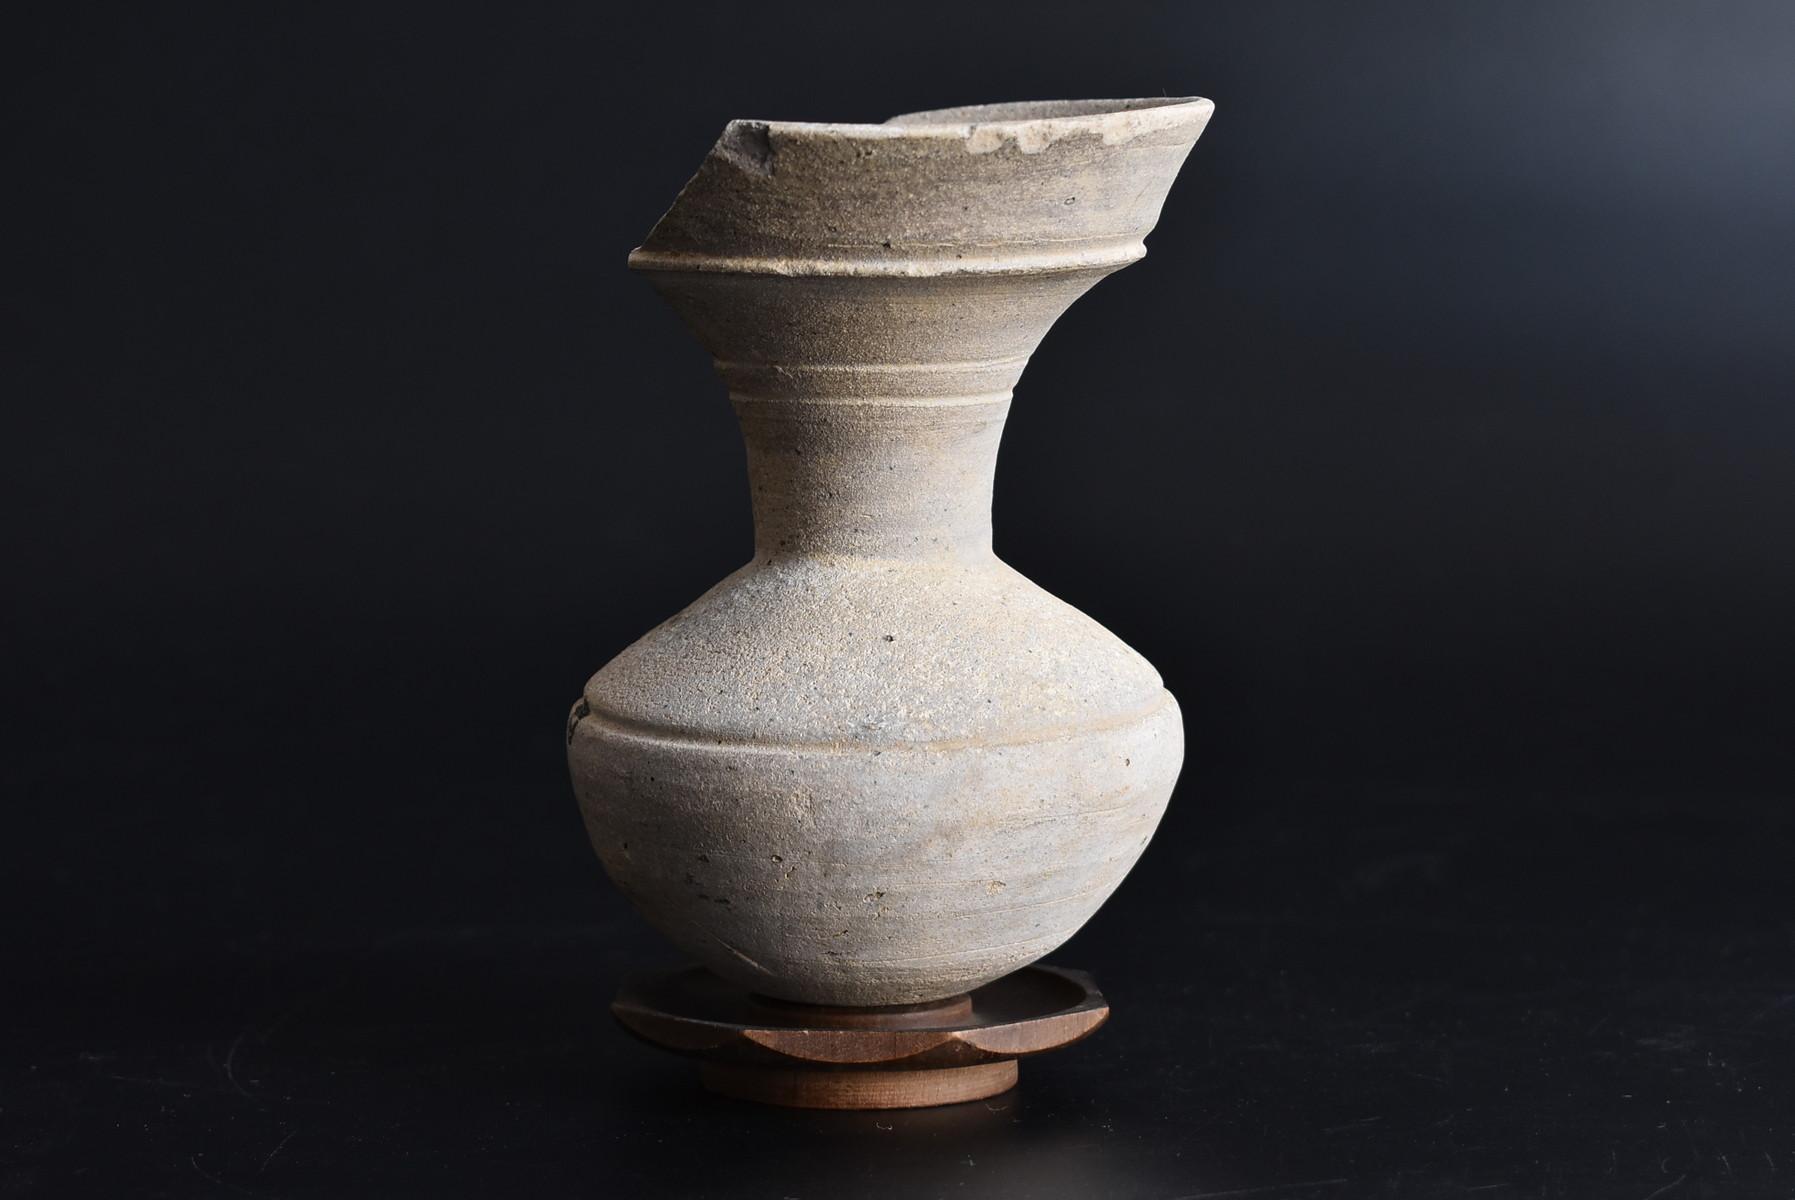 Ancient Japanese Pottery - 4 For Sale on 1stDibs